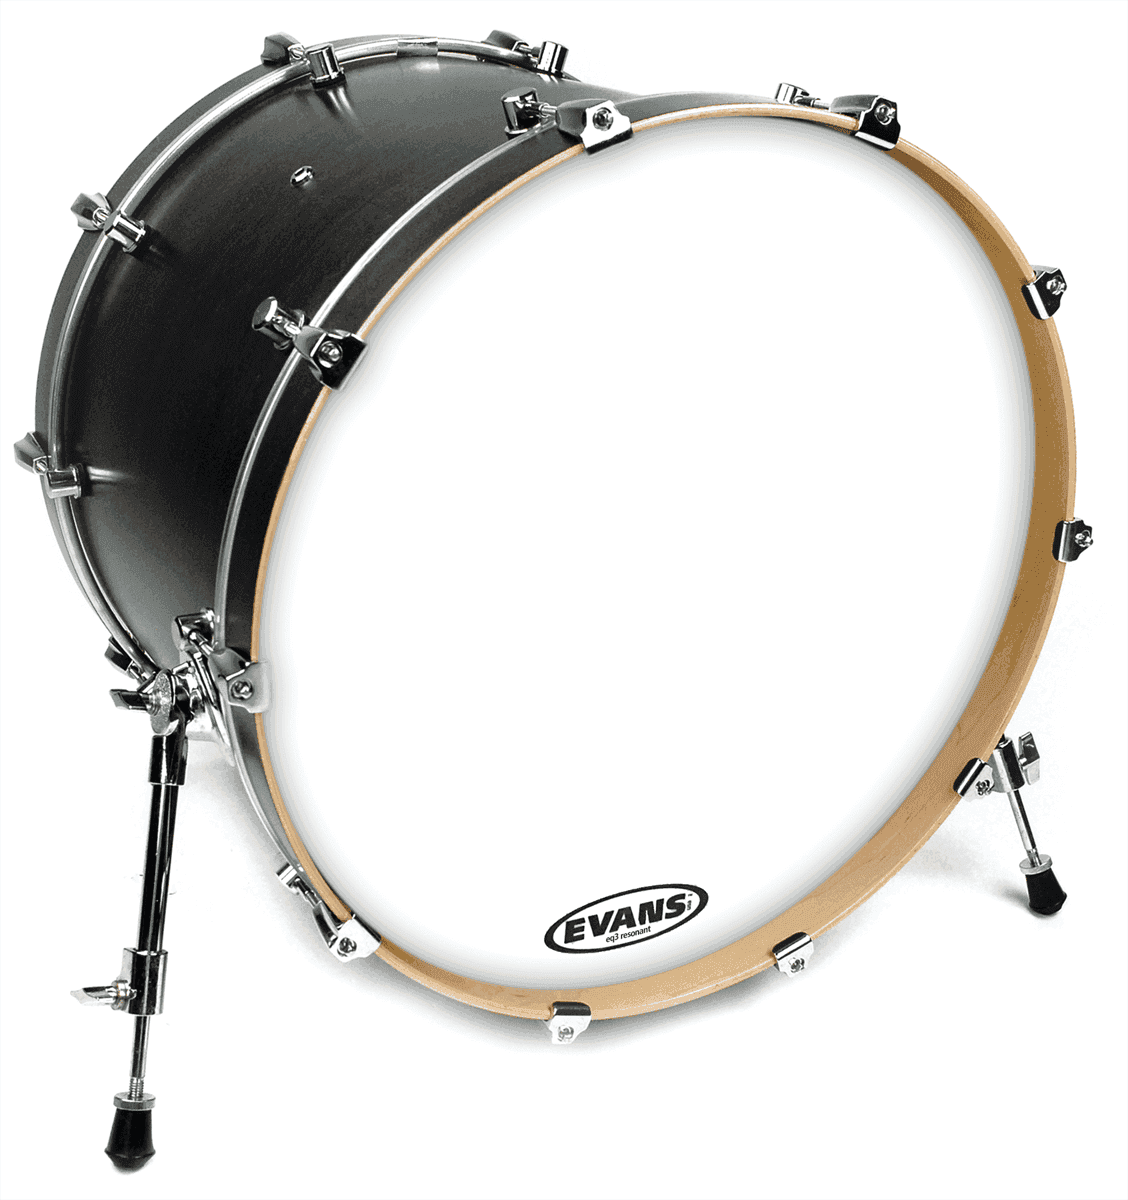 Evans Eq3 Resonant No Port Smooth White Bass Drumhead, Bass Hoop - 16 Pouces - Bass drum drumhead - Variation 2